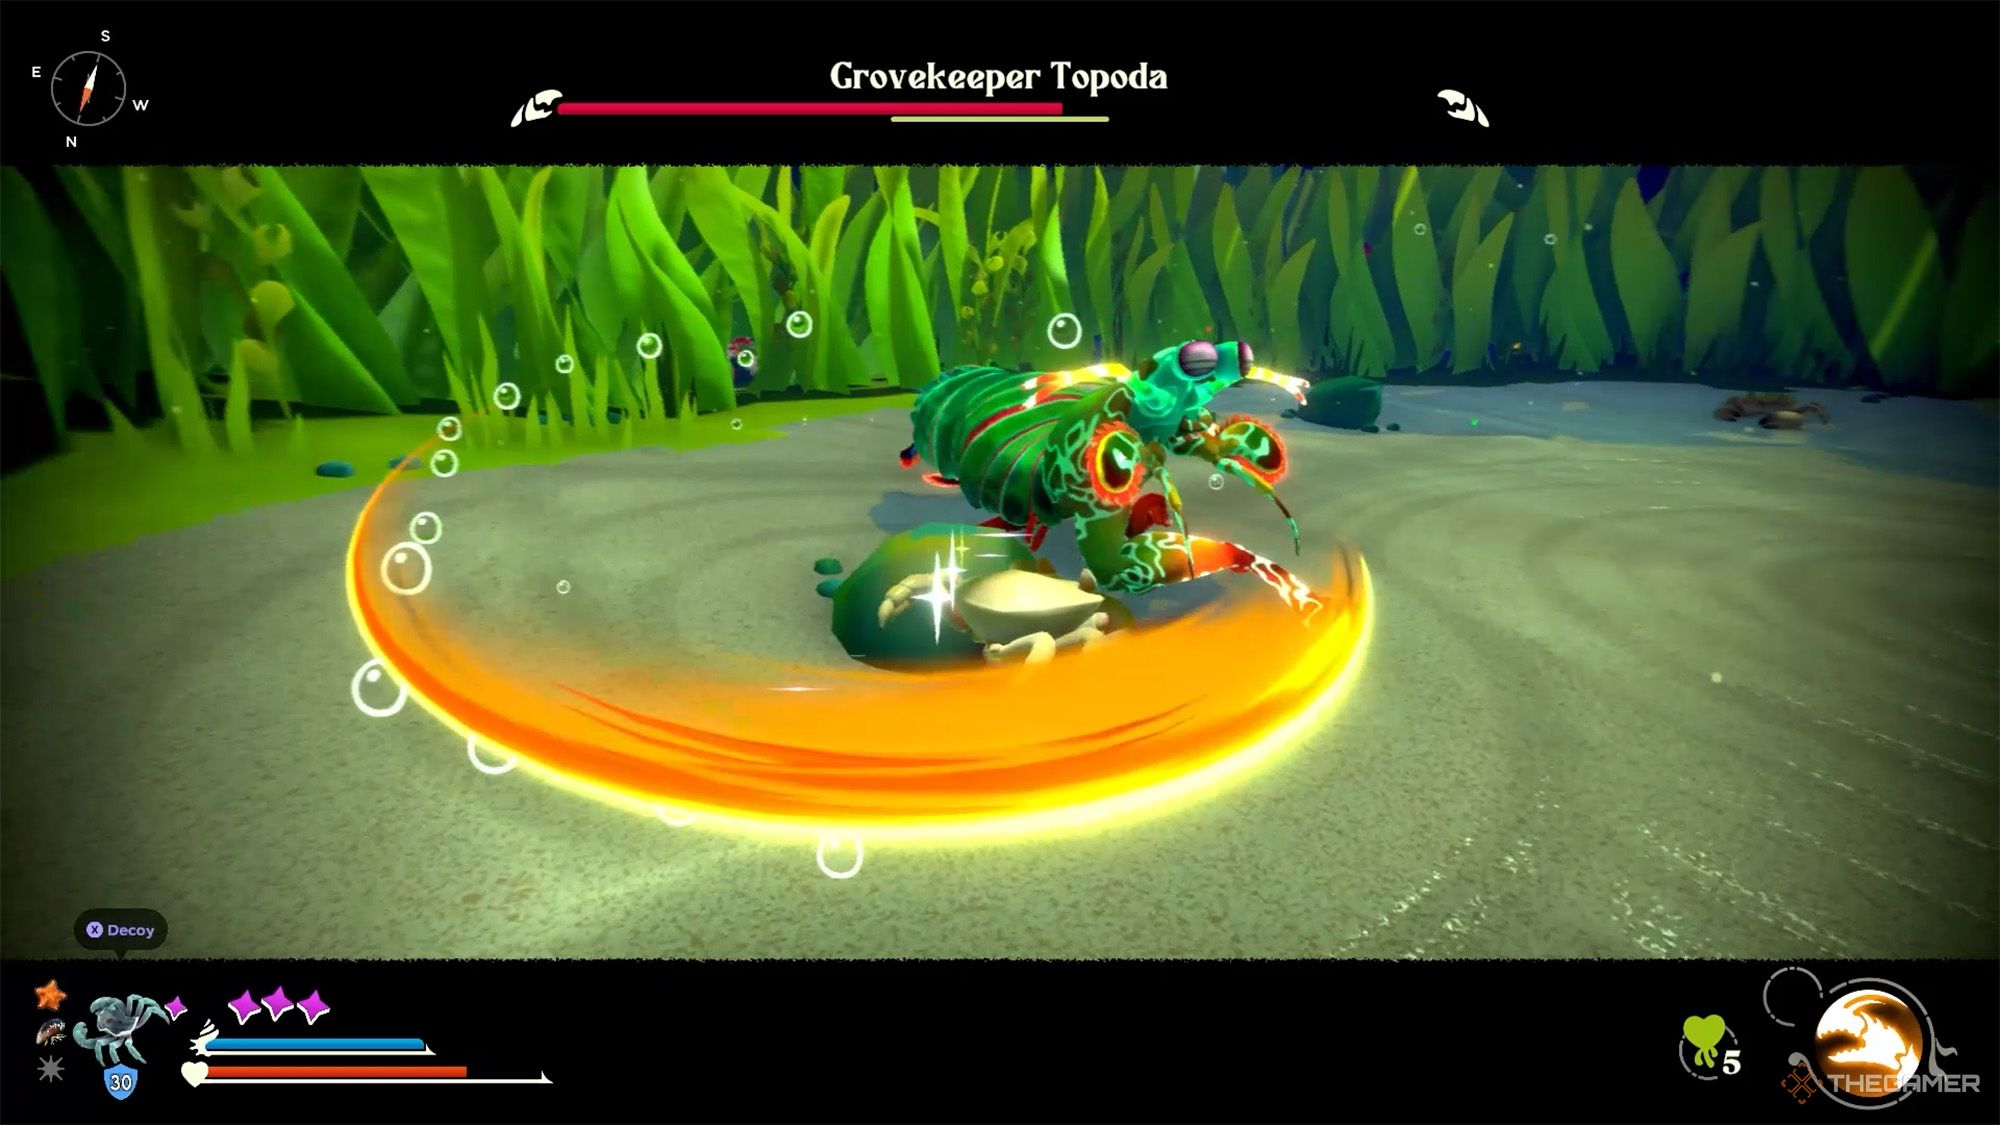 Another Crab's Treasure - Grovekeeper Topoda using double punch against Kril